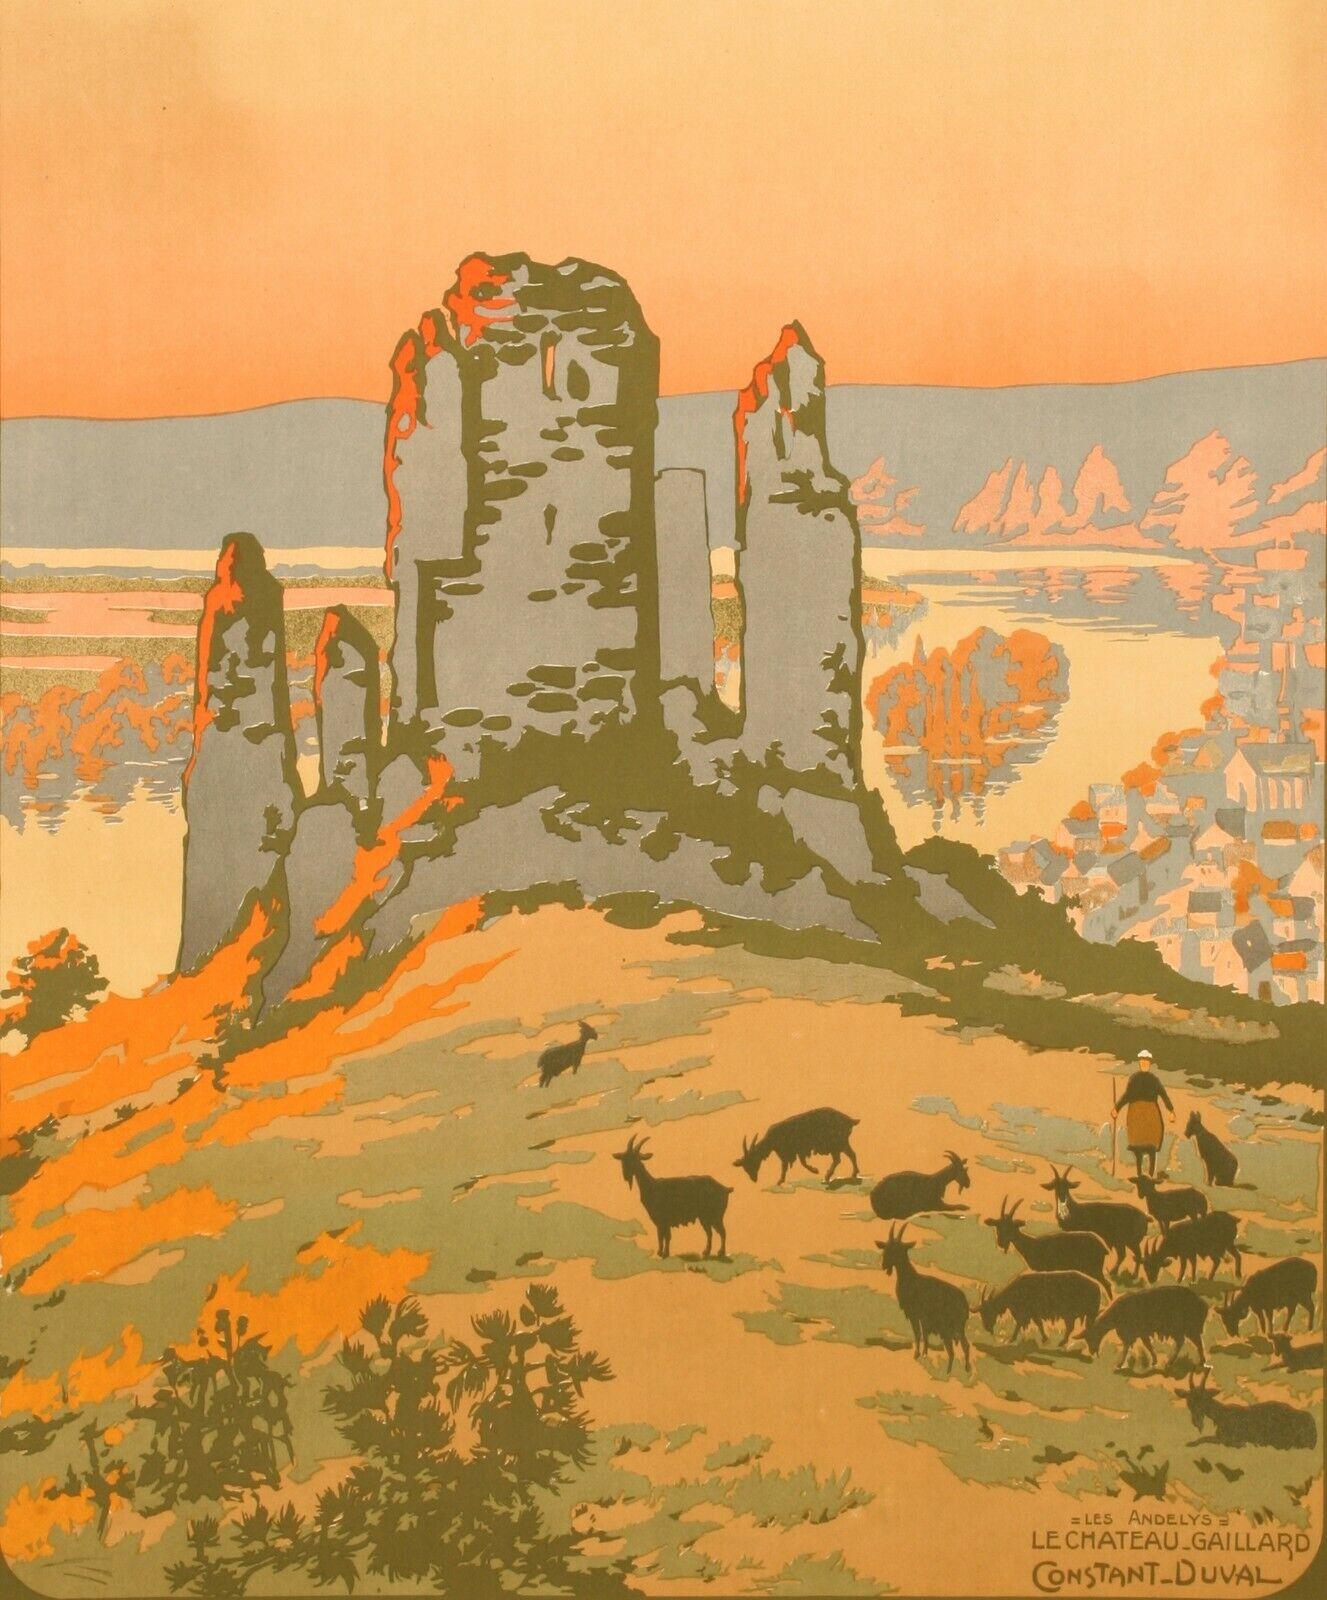 Original Poster-Constant Duval-Normandie-Bretagne-Château De Gaillard, c.1920

Poster by the French Railways to promote tourism in Normandy - Brittany.

Additional Details: 
Materials and Techniques: Colour lithograph on paper
Status: